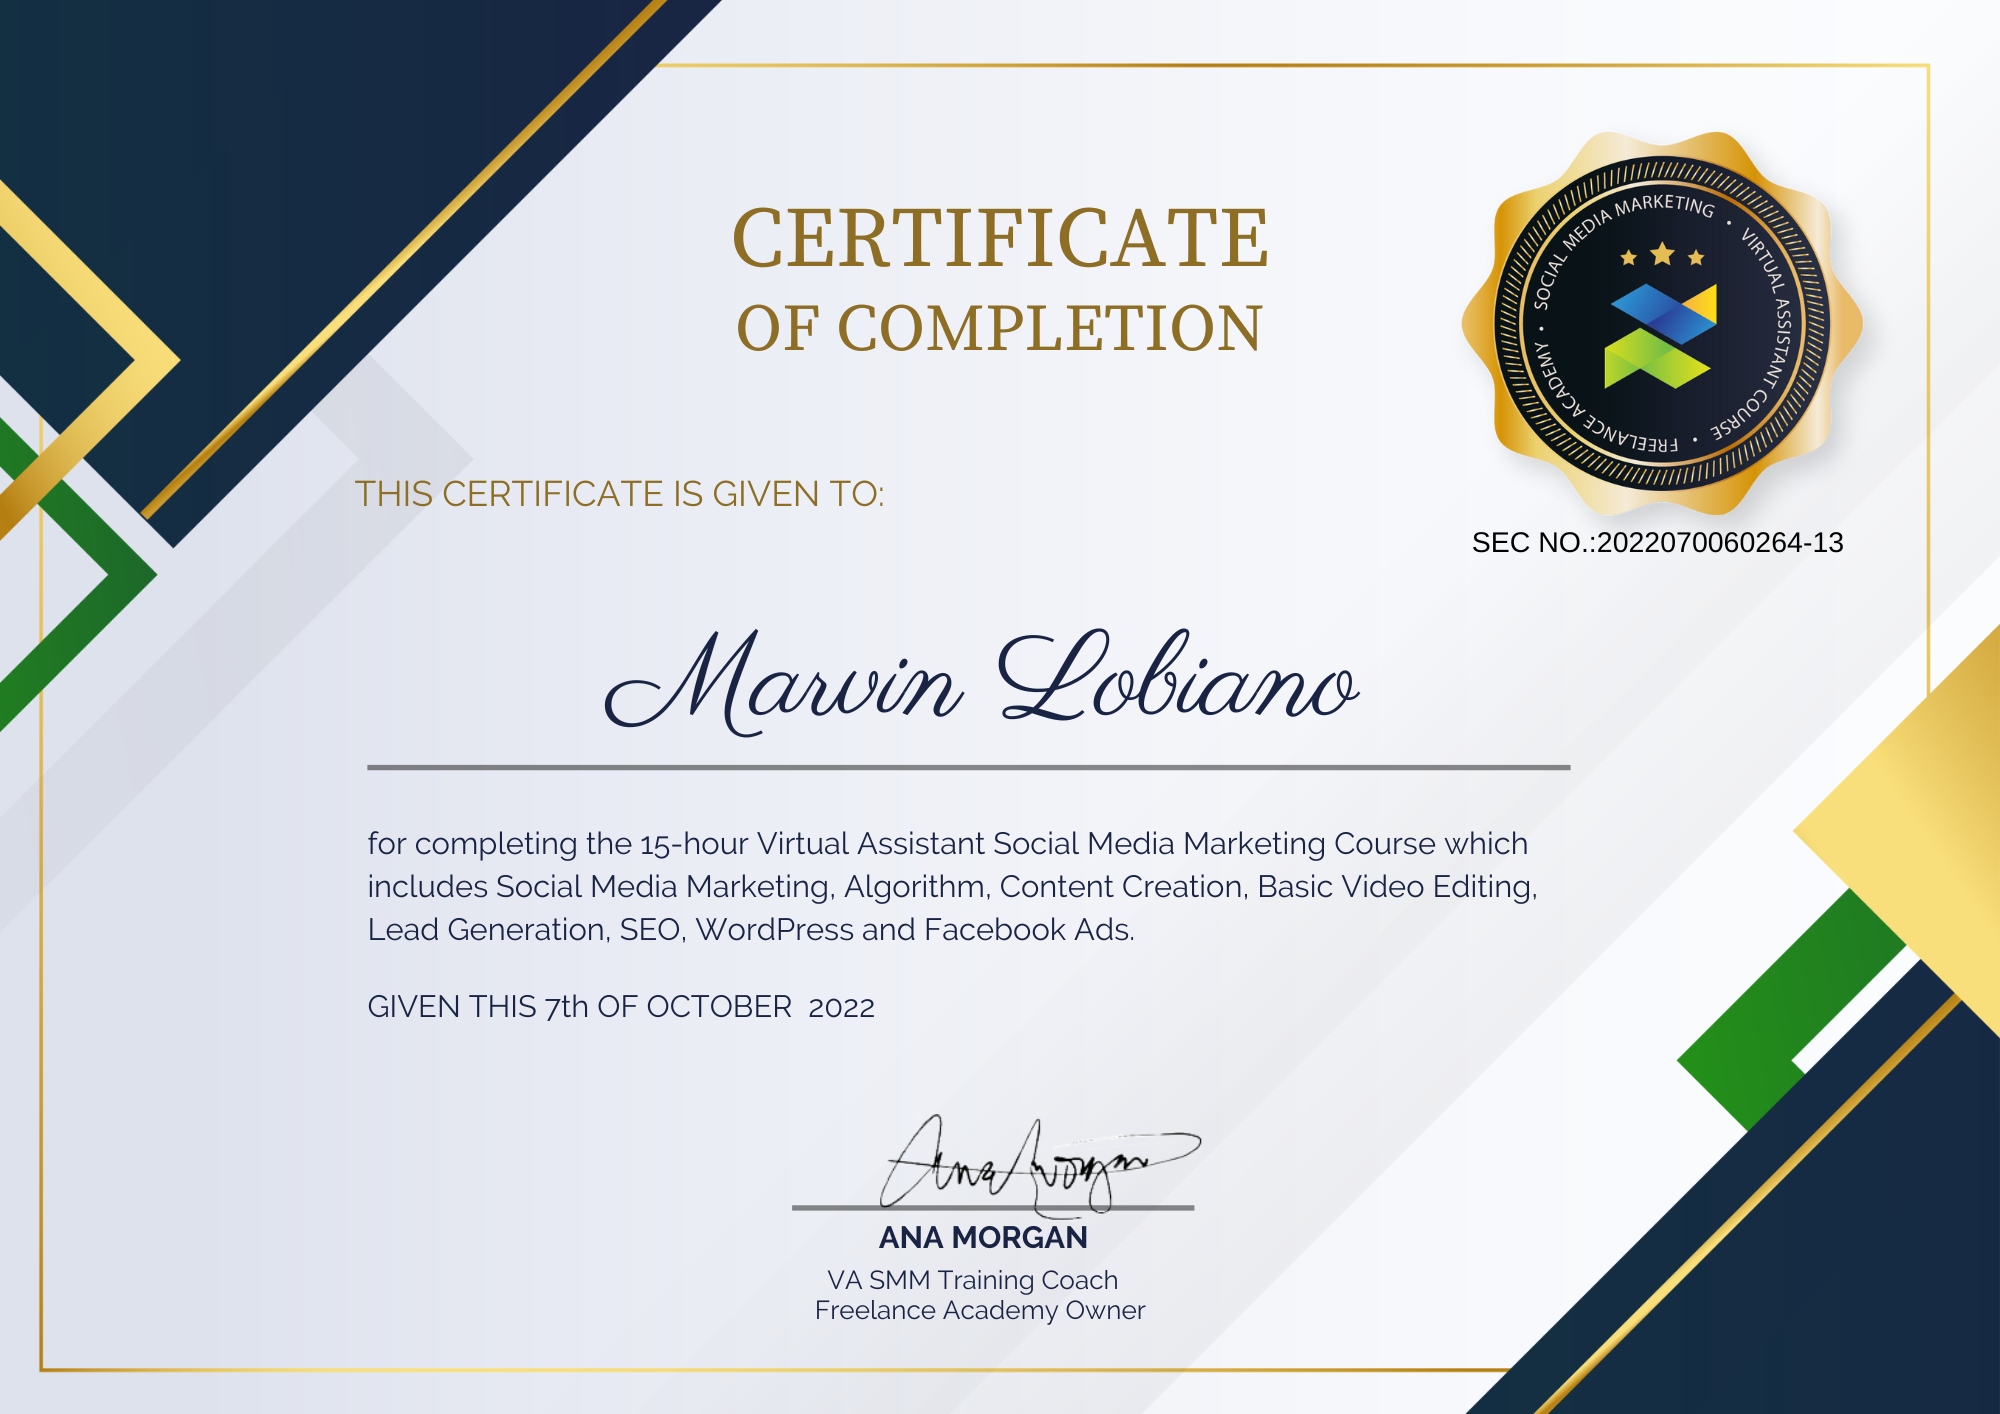 Marvin Lobiano has a SMM Certificate